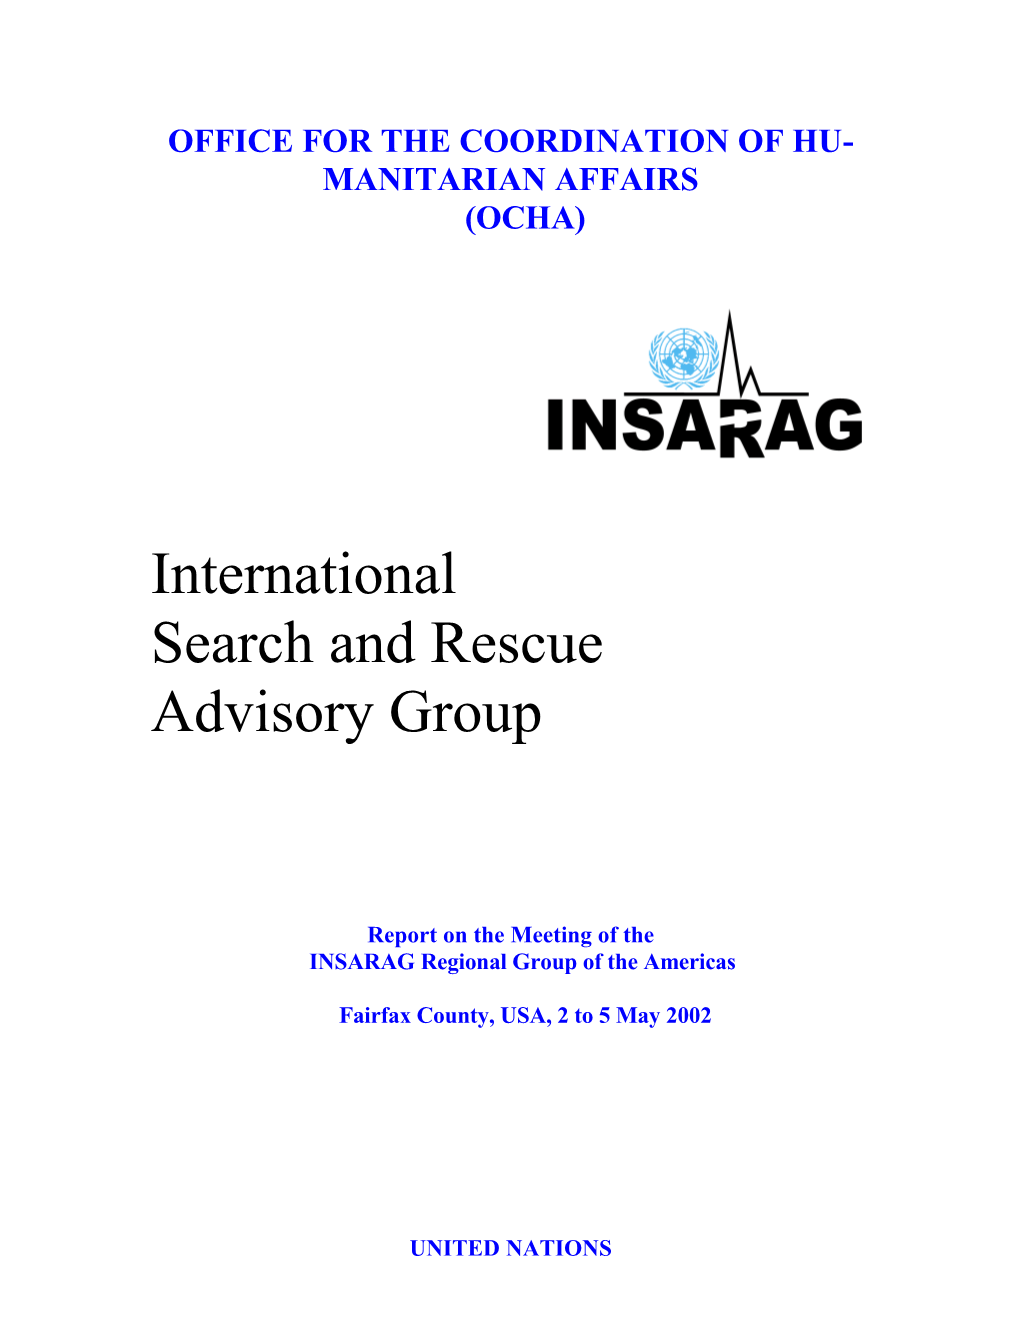 Office for the Coordination of Humanitarian Affairs s1